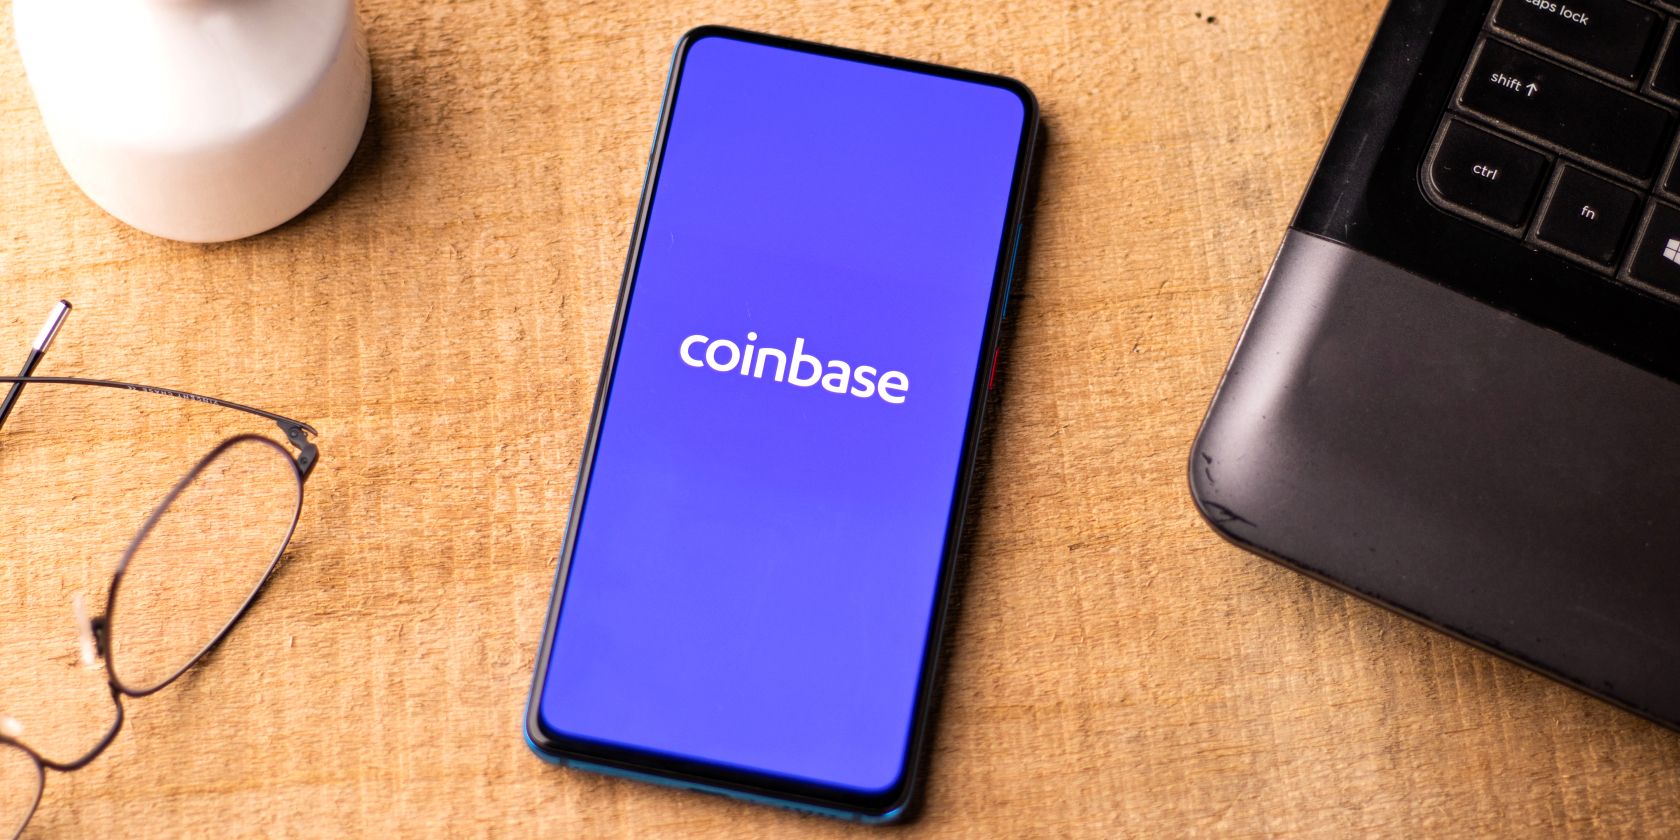 coinbase logo on smartphone feature